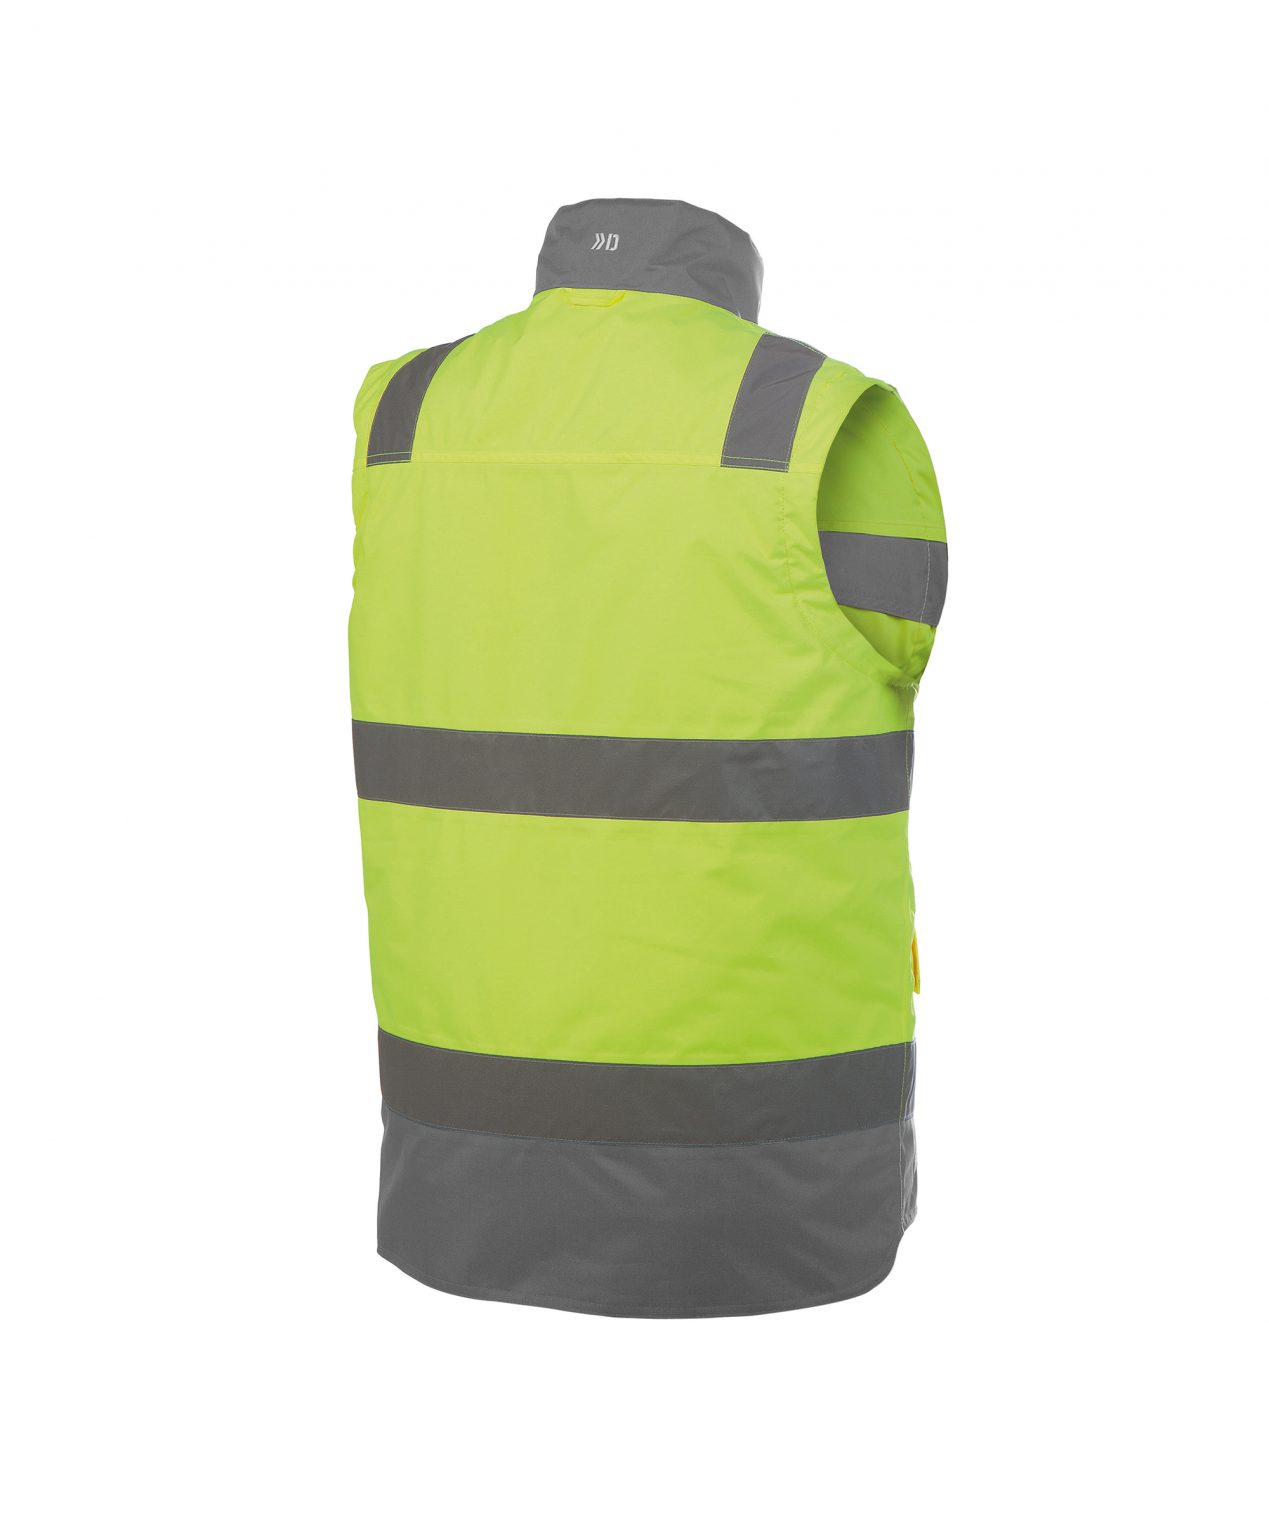 bilbao high visibility body warmer fluo yellow cement grey back